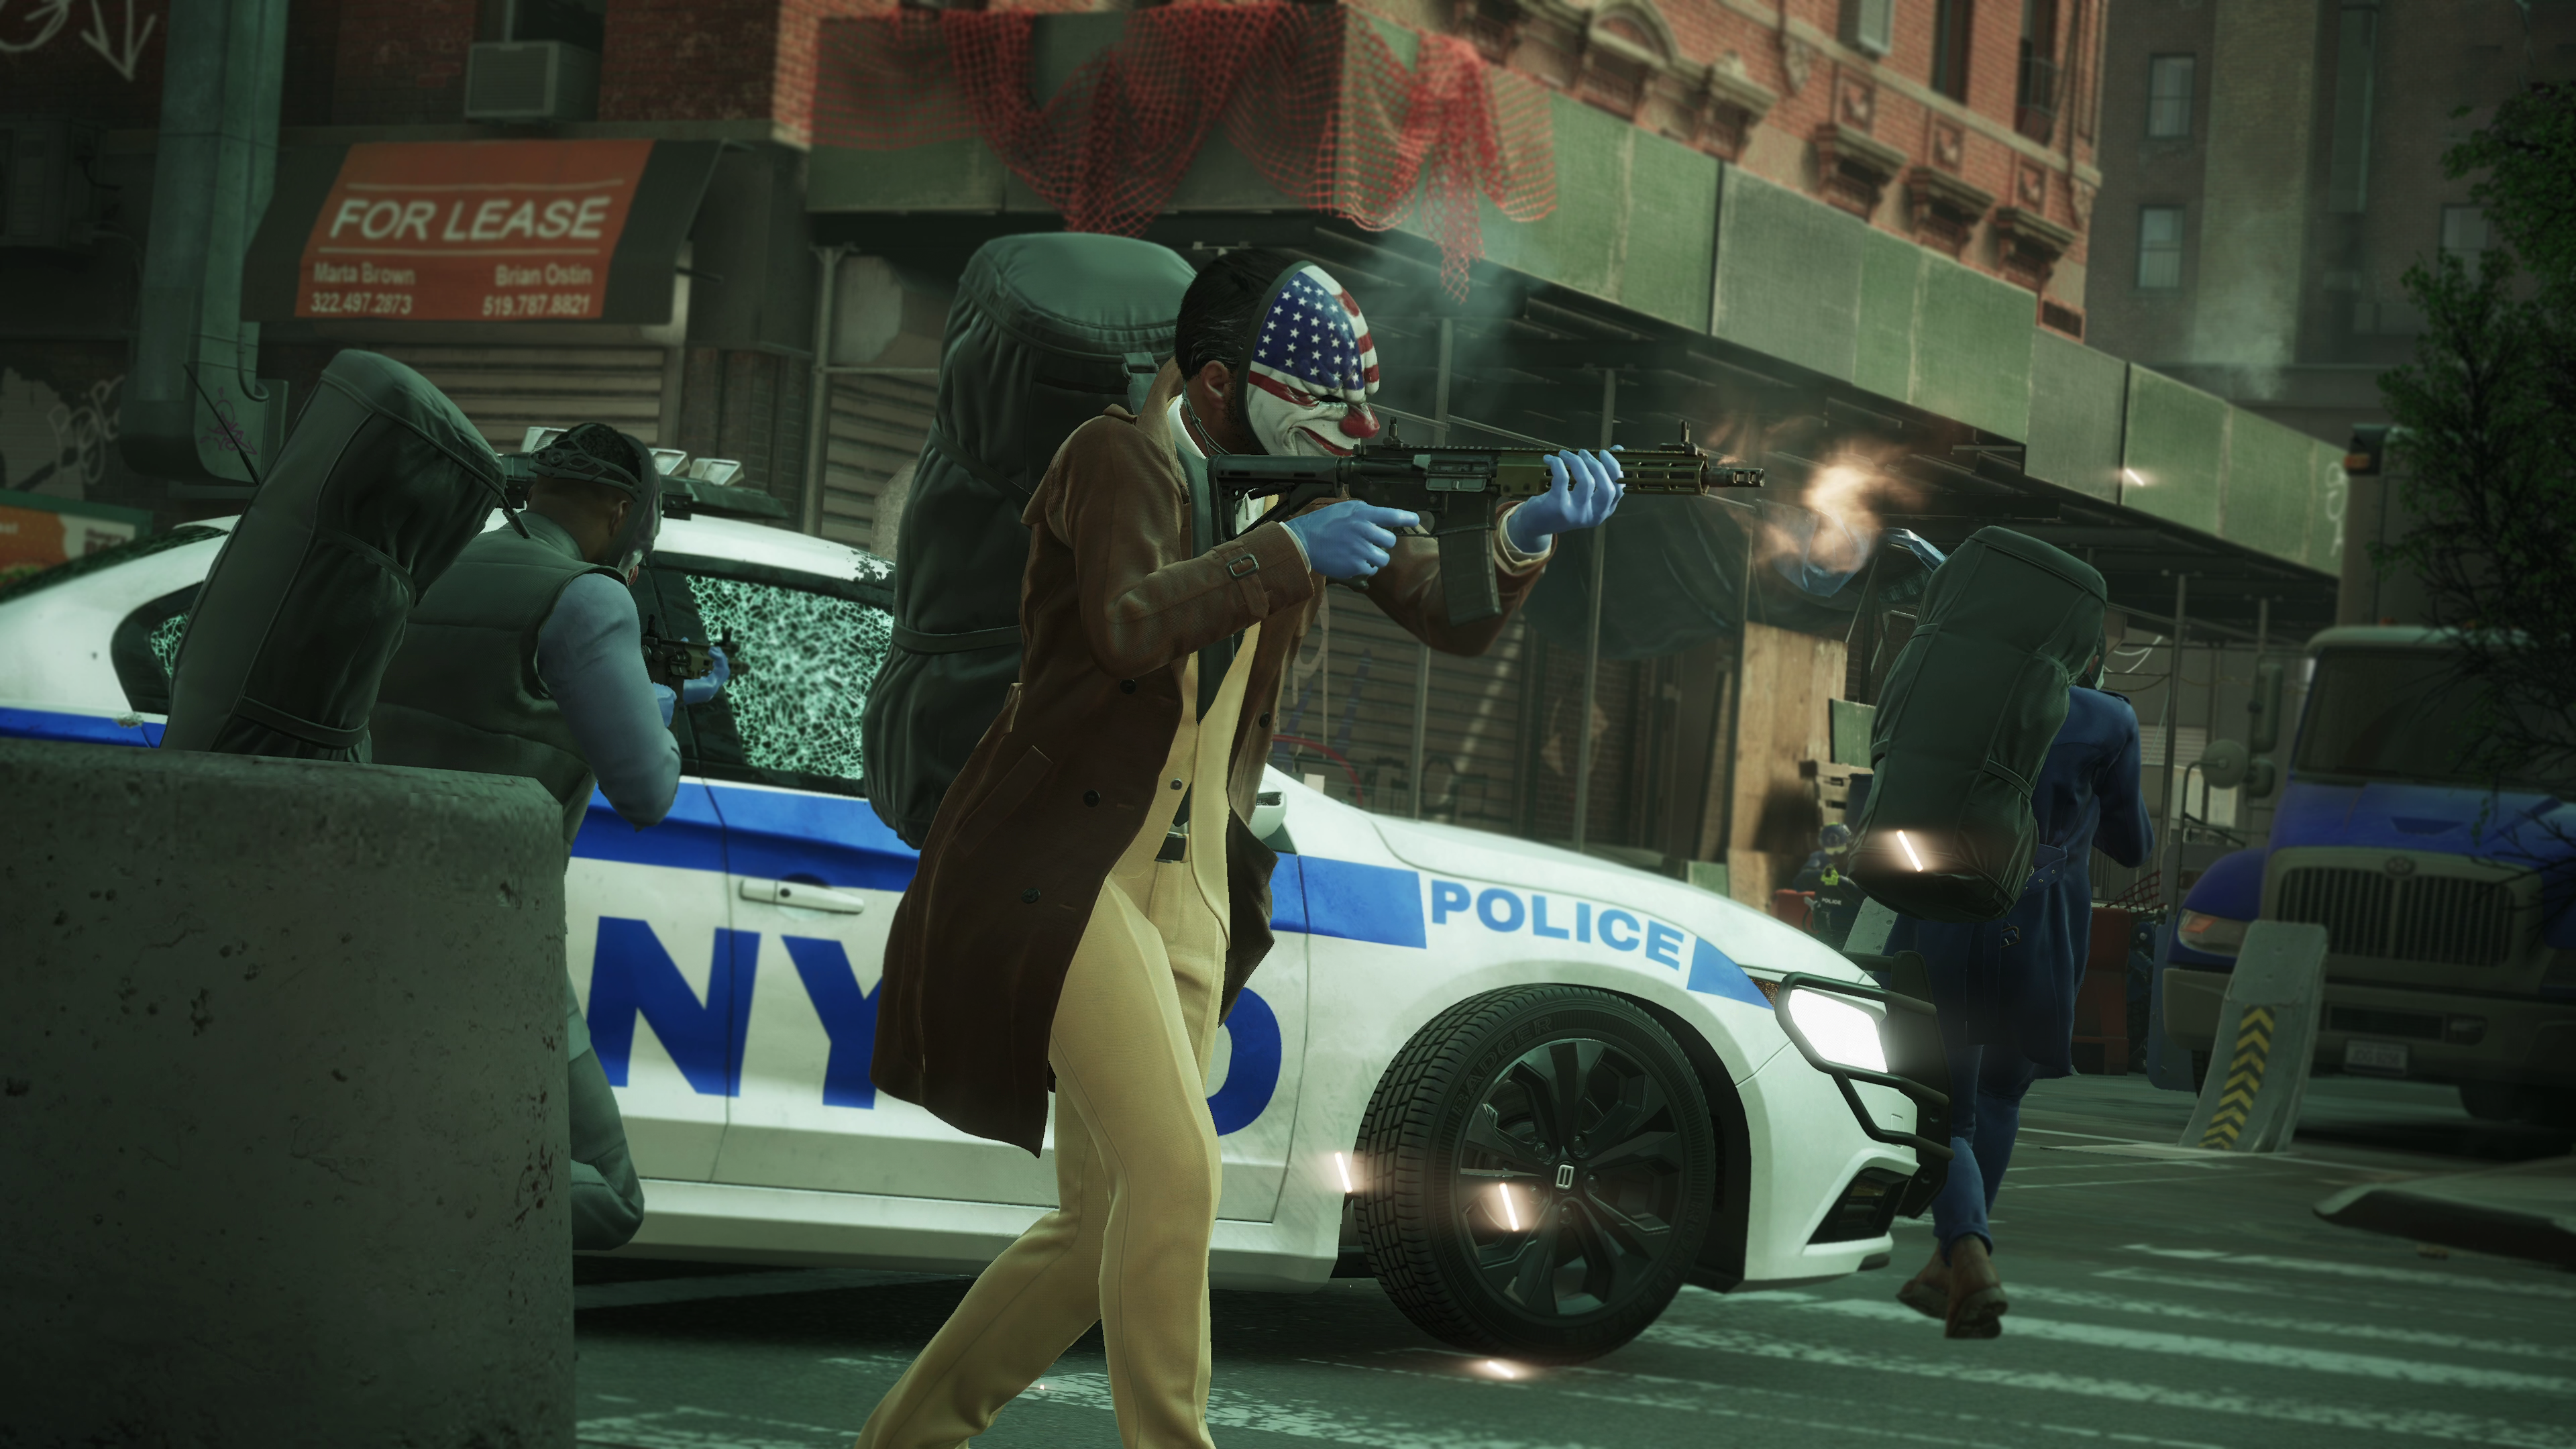 Payday 3 suffered from a very slow launch due to server issues and